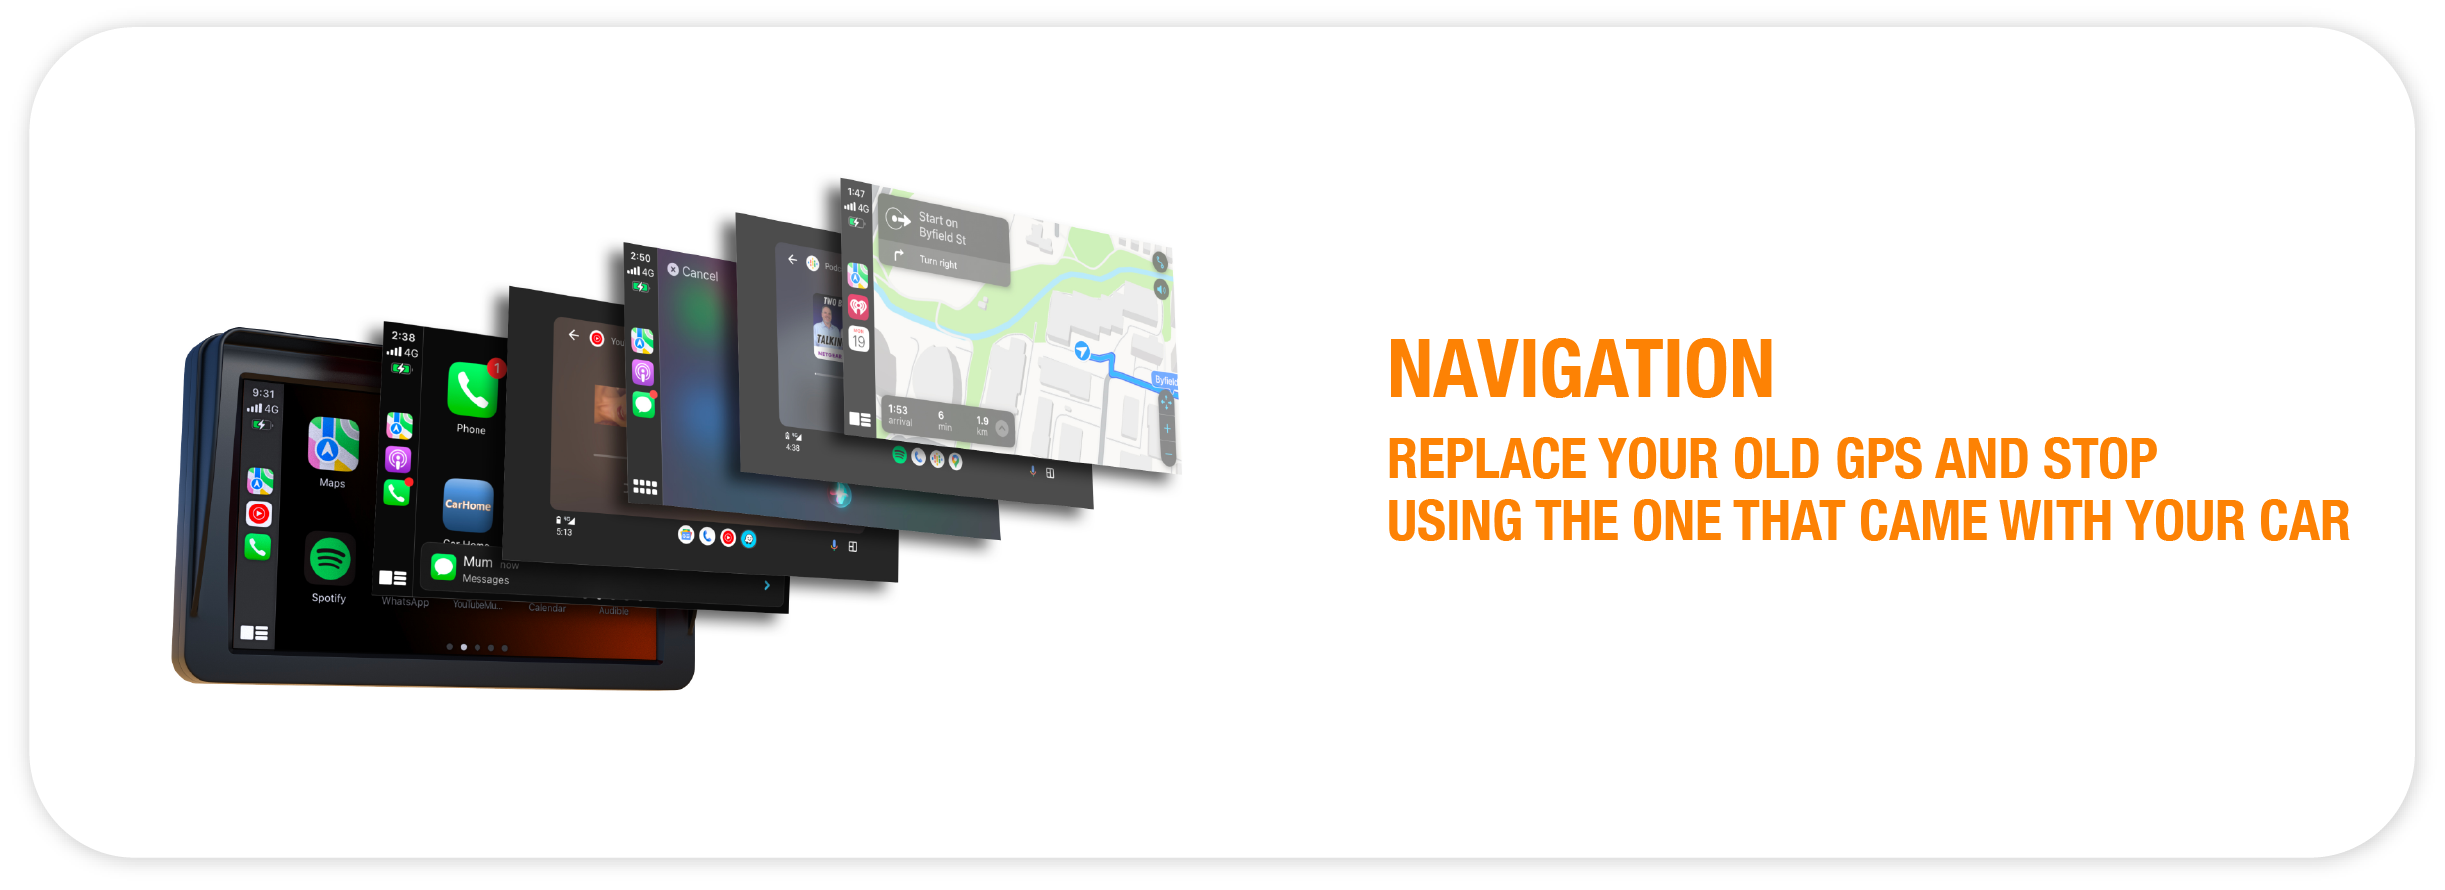 Replace your old GPS and stop using the one that came with your car